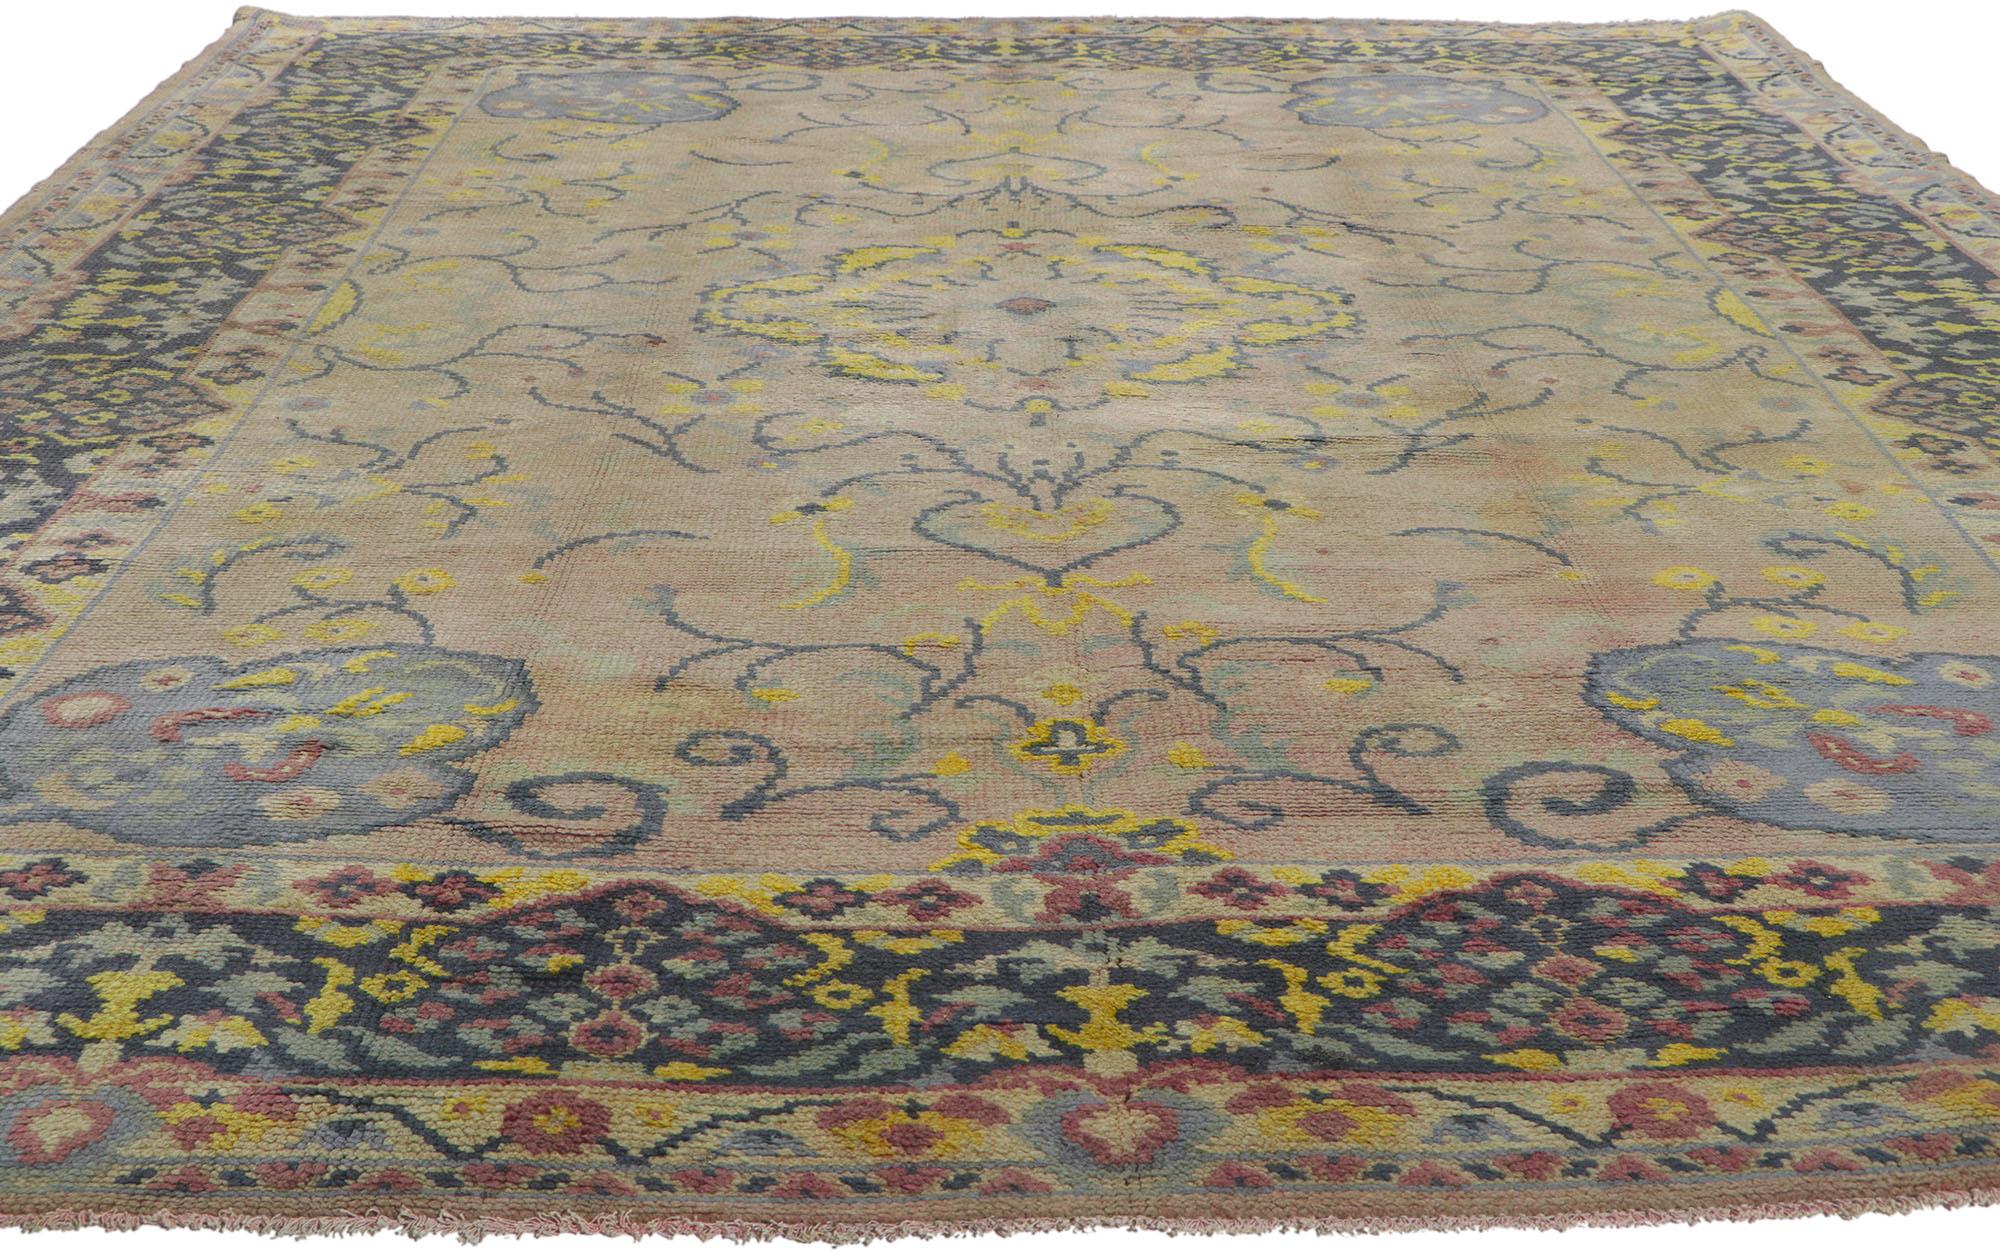 Vintage Turkish Oushak Rug with European Cottage Style In Good Condition For Sale In Dallas, TX